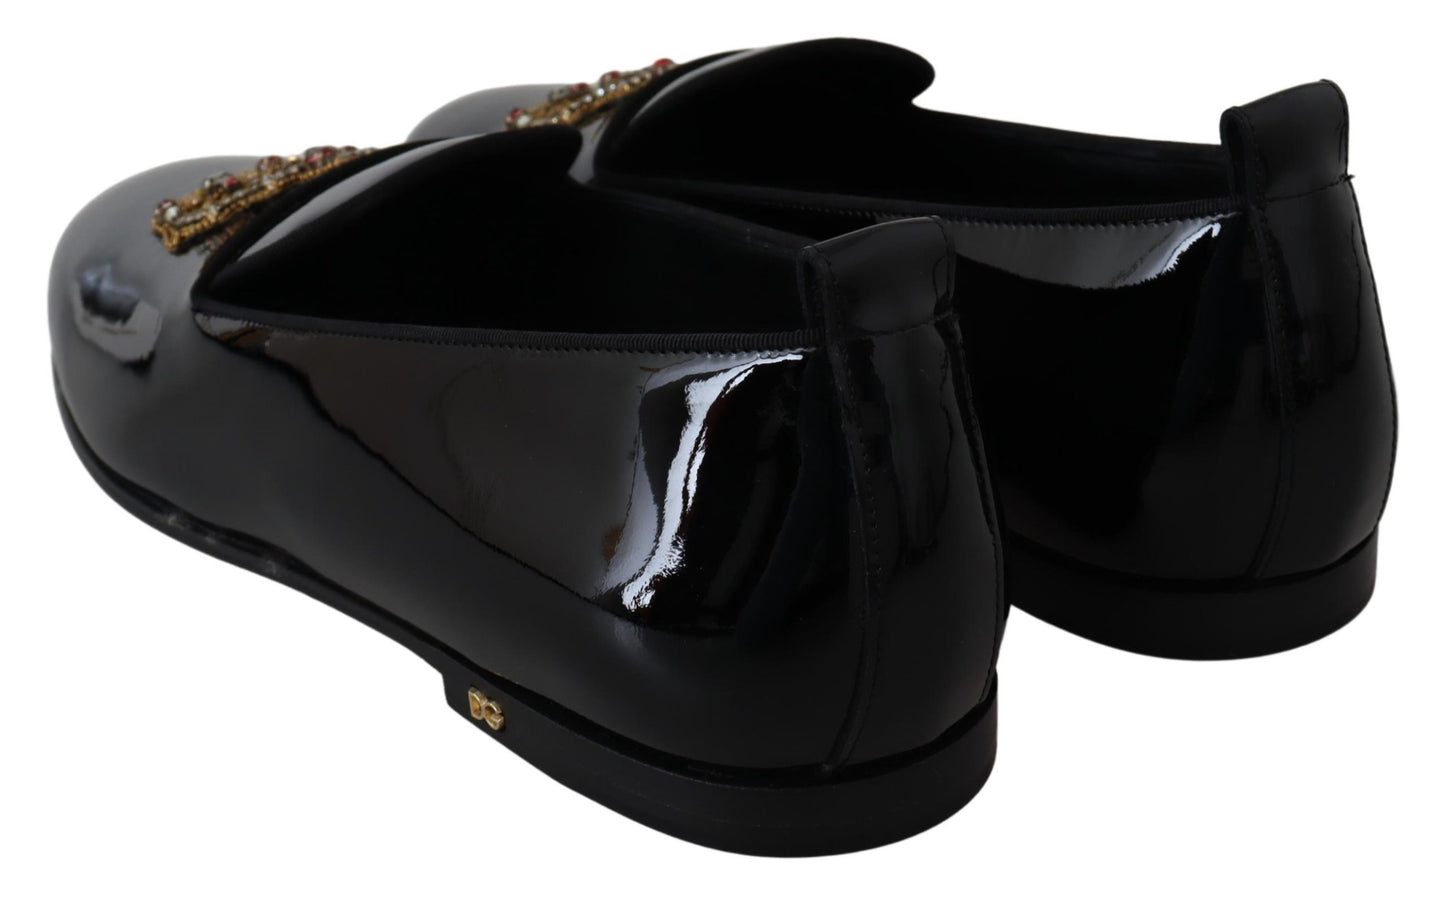 Black Leather Crystal Crown Loafers Shoes